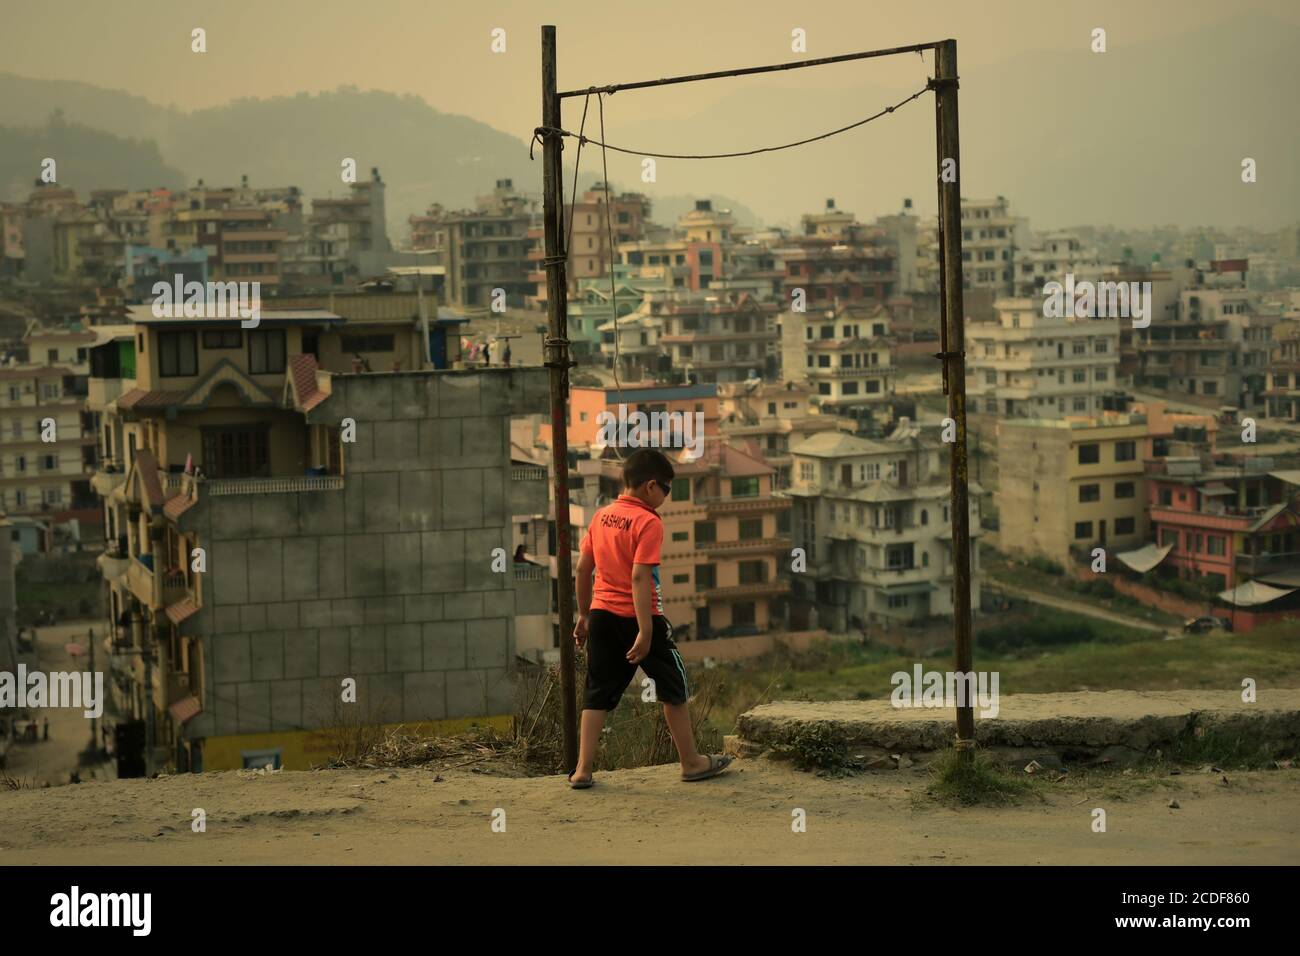 A child walking on roadside, through an alley gate leading to a residential area on the outskirts of Kathmandu, Nepal. Stock Photo